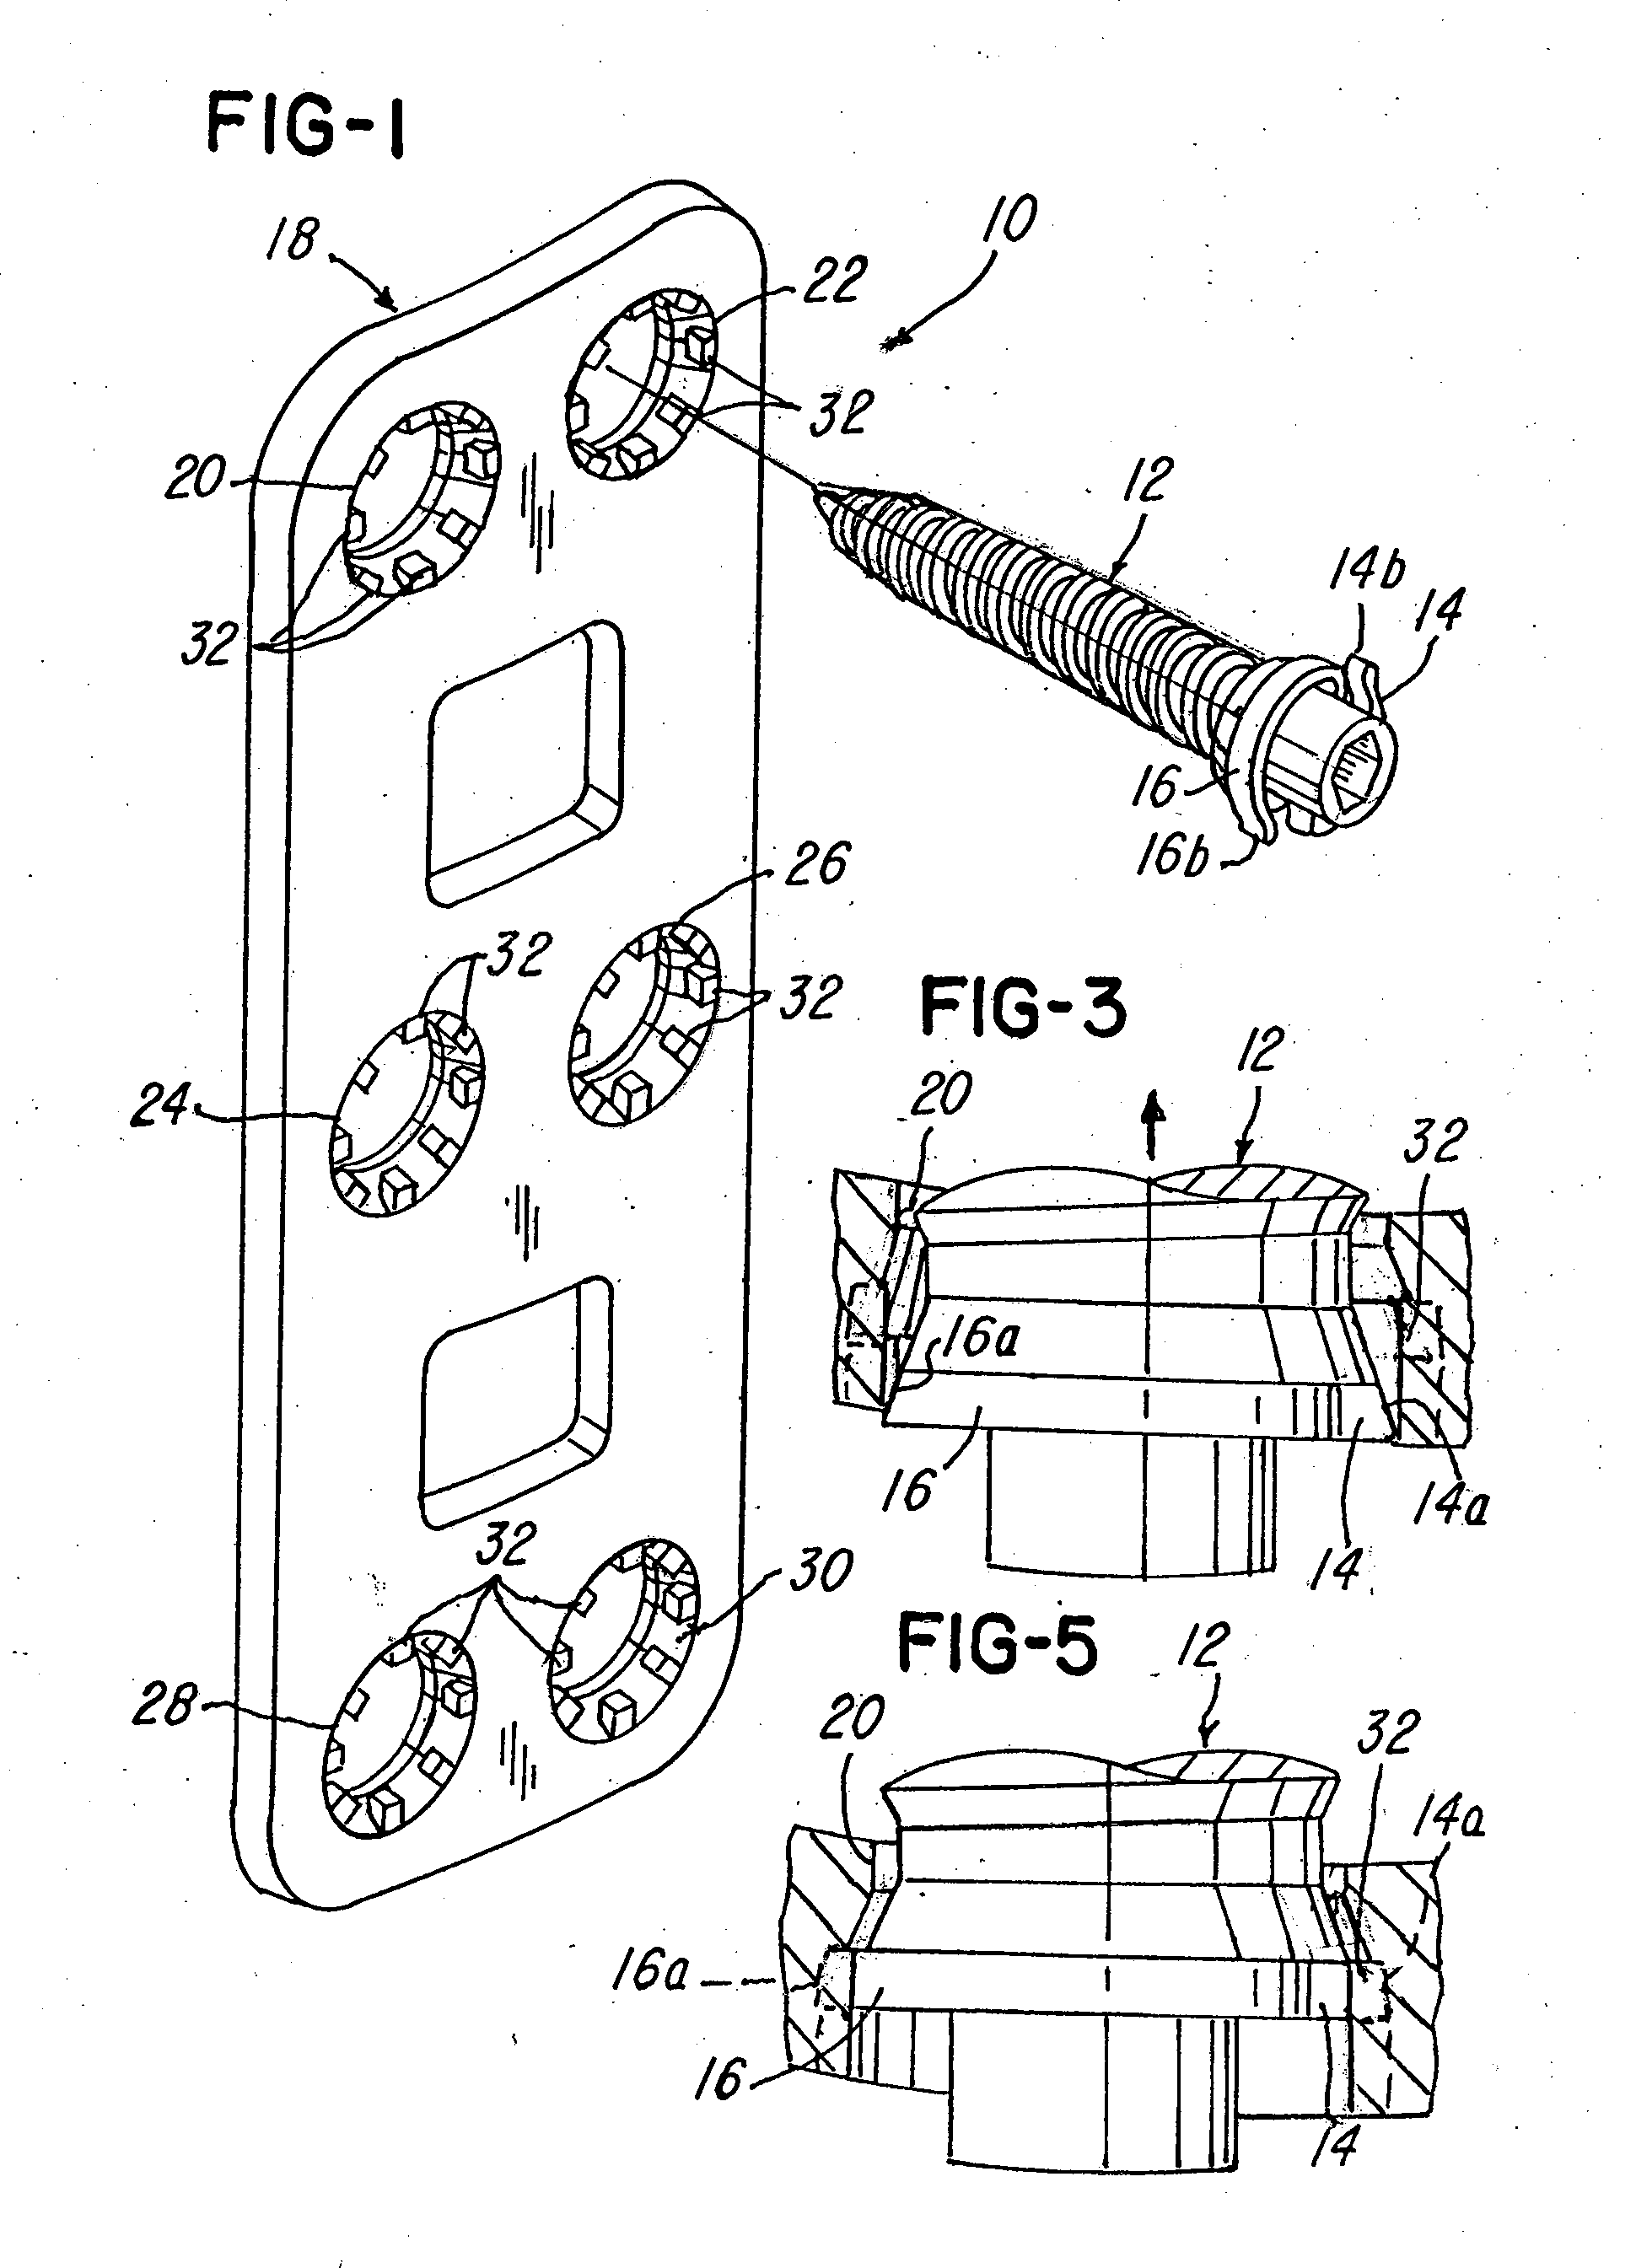 Implant plate screw locking system and screw having a locking member